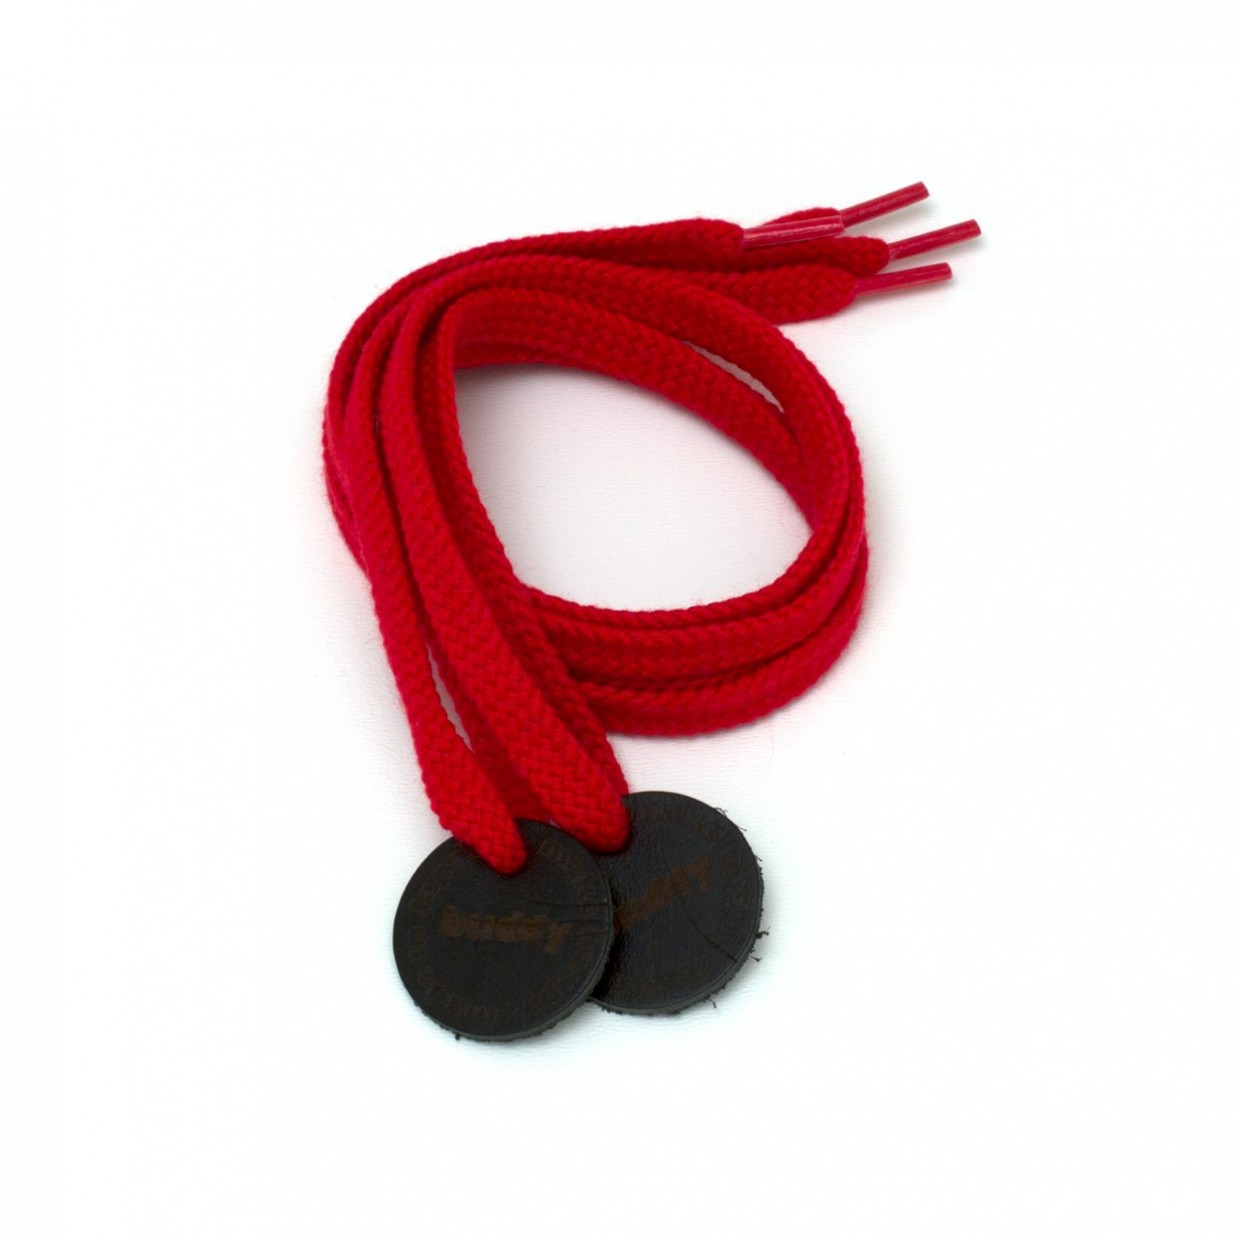 Shoelaces Red with Leather patch 78 cm : 31 "